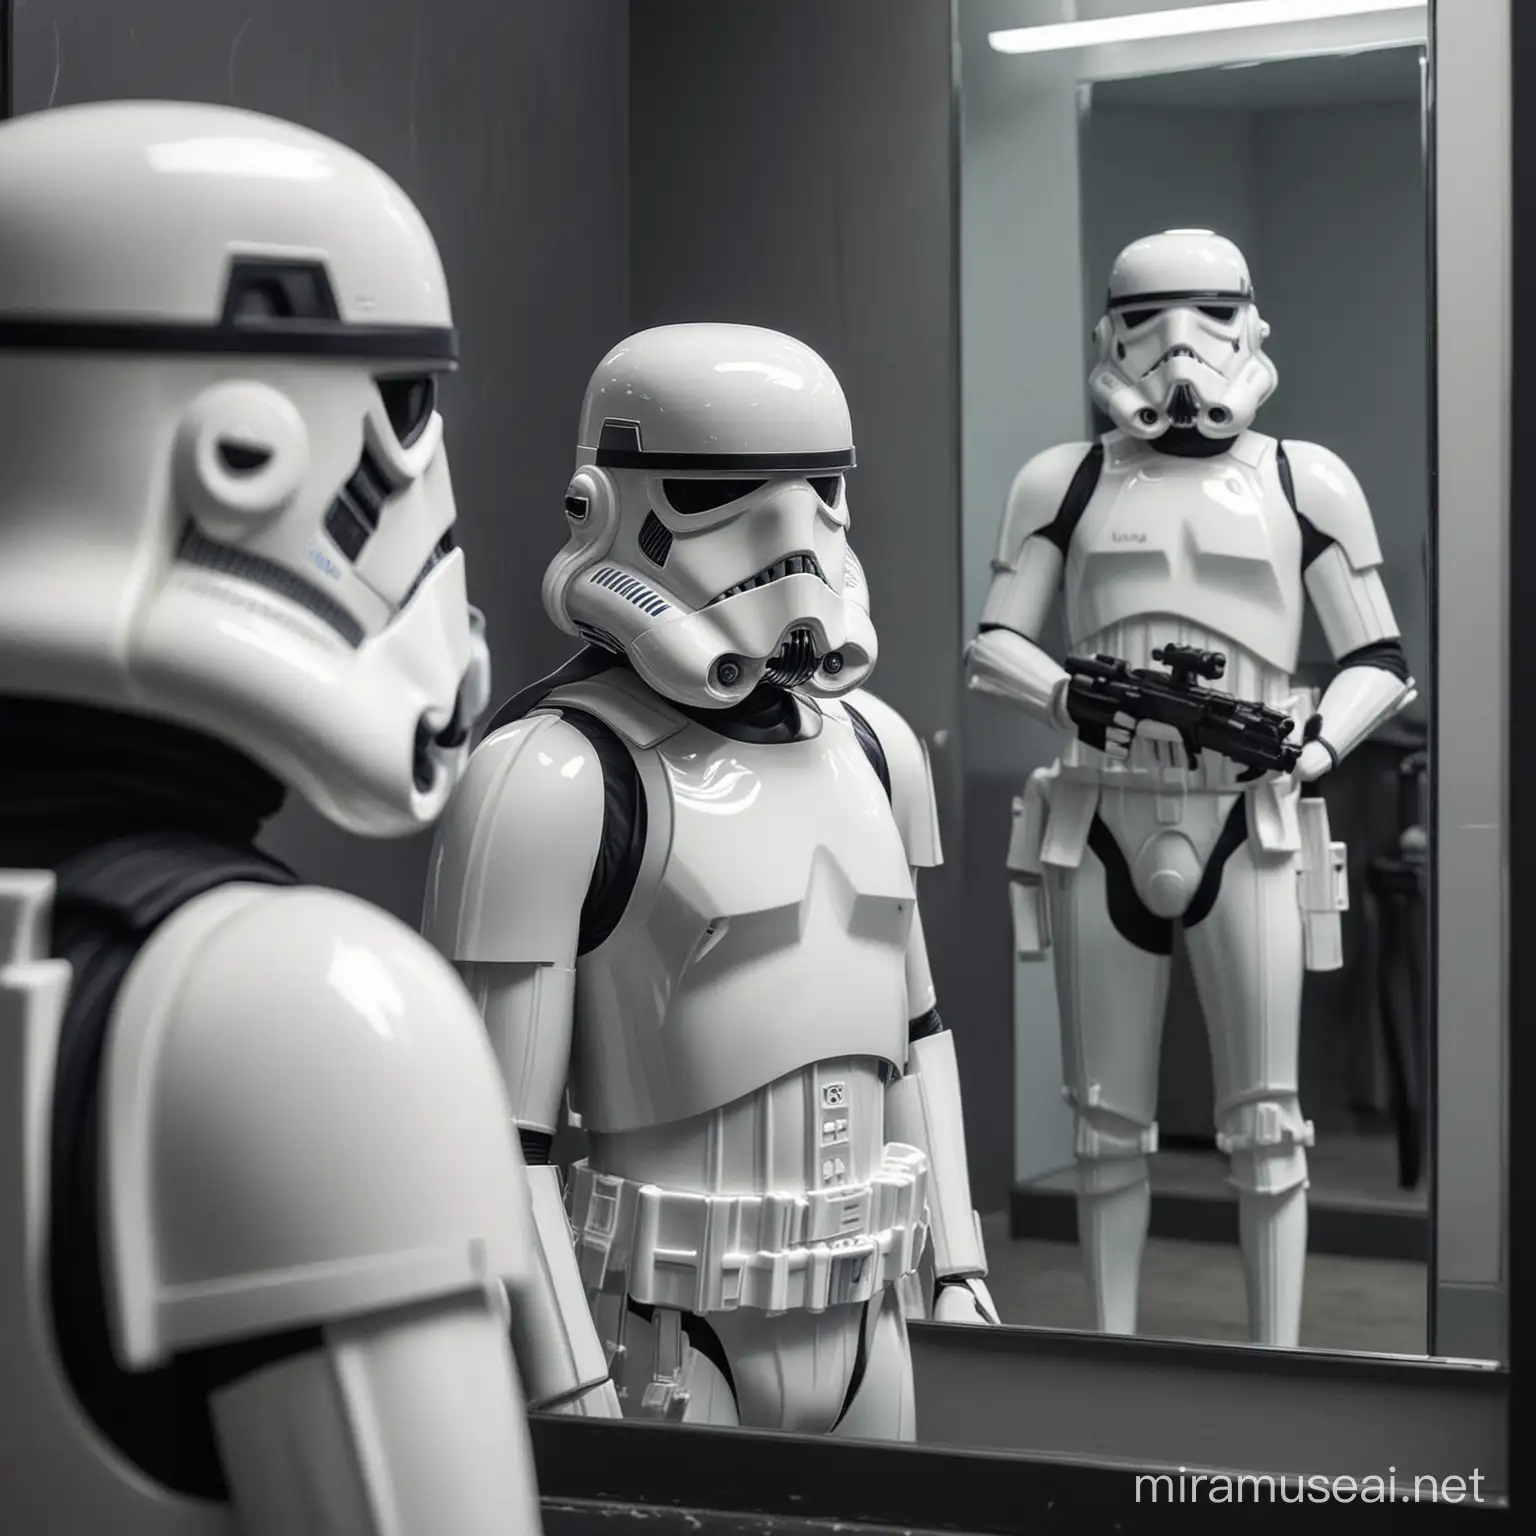 A stormtrooper looking at himself in the mirror